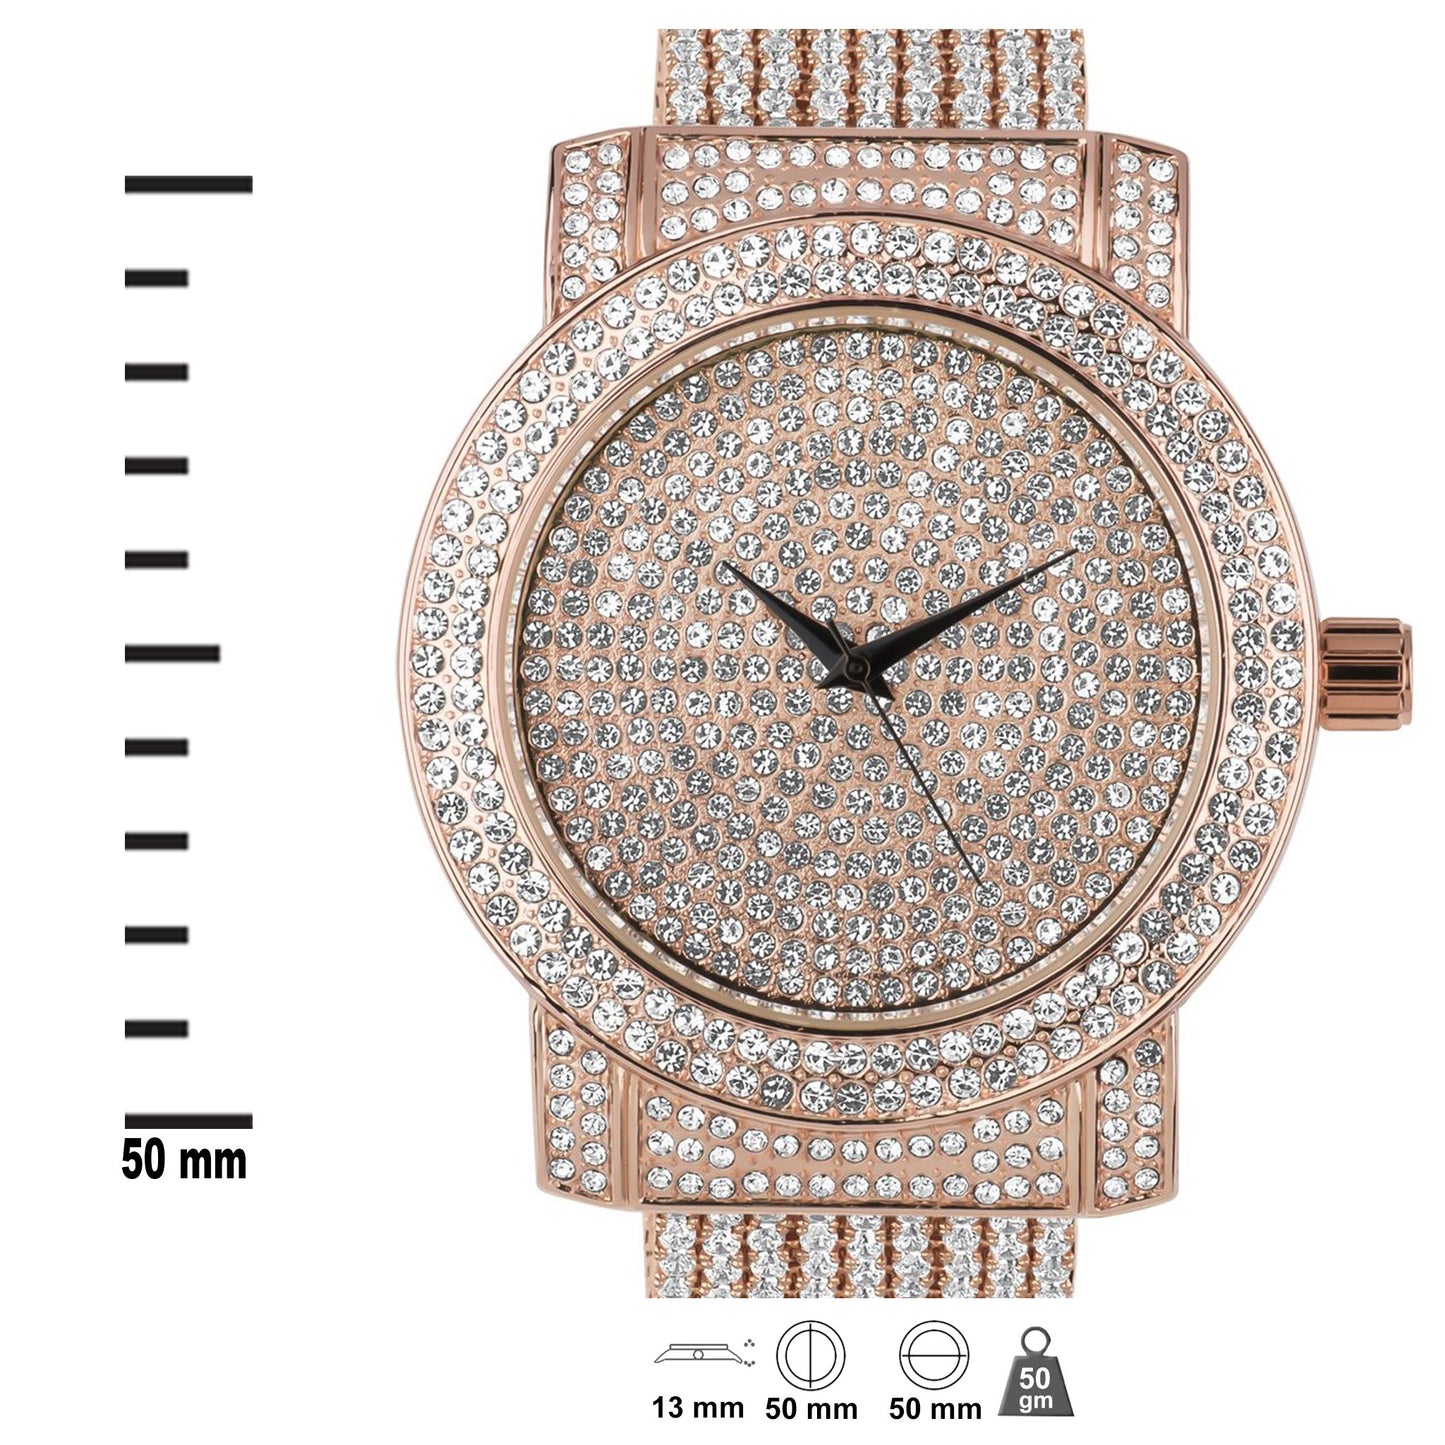 Beguiling CZ WATCH -5110275